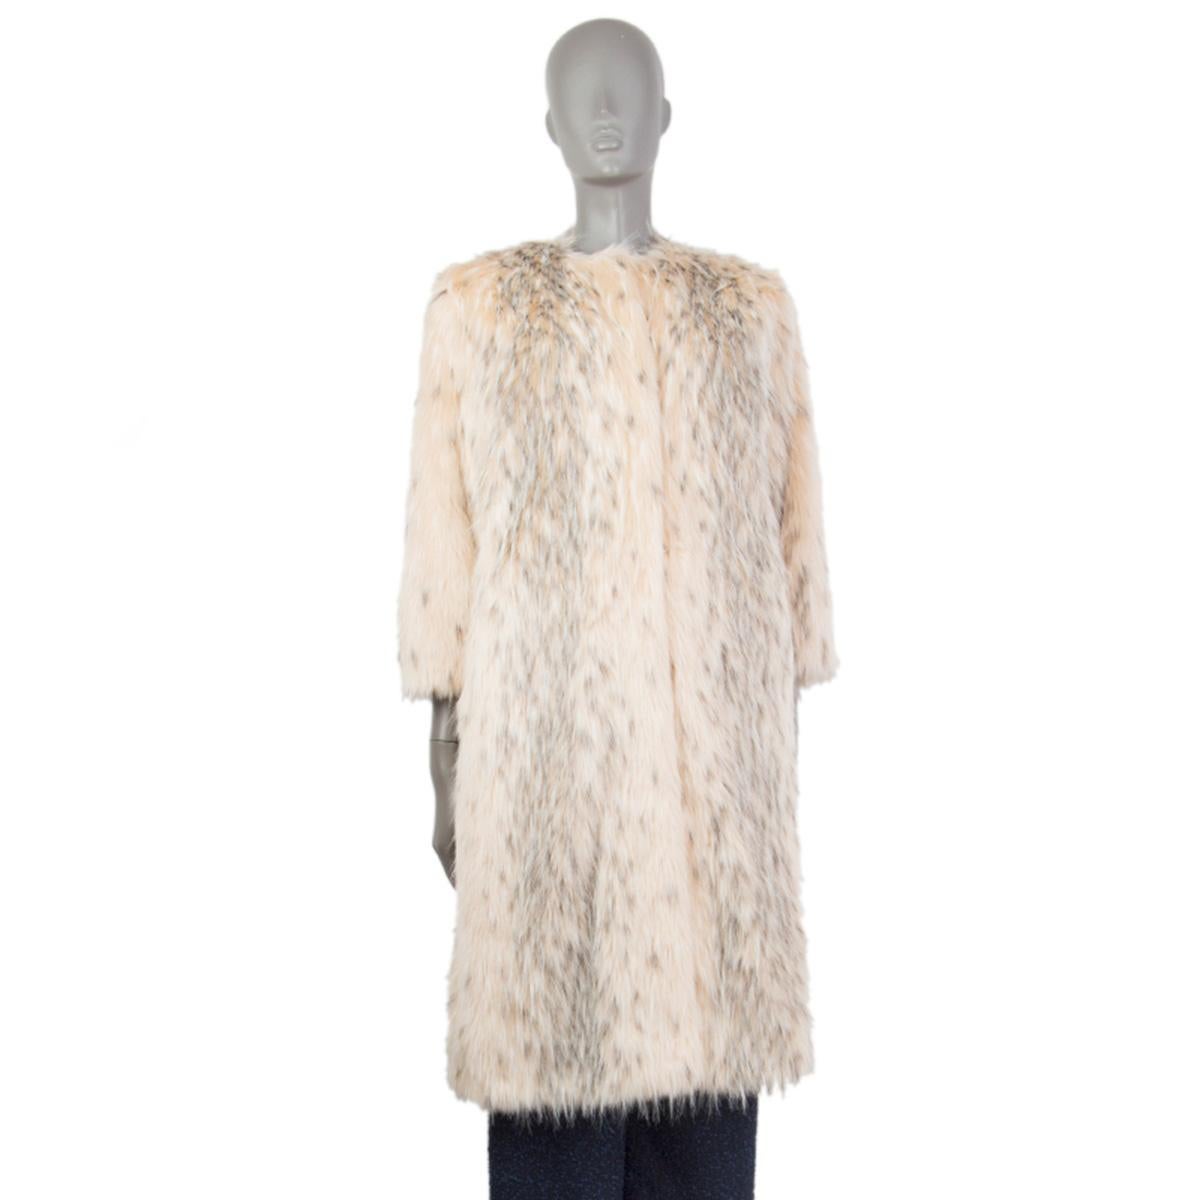 100% authentic Prada collarless faux fur coat in light nude-beige, grey, and white modacrylic (100%). With two slit pockets on the sides. Closes with concealed hooks on the front. Lined in off-white viscose (60%) and silk (40%). Has been worn and is